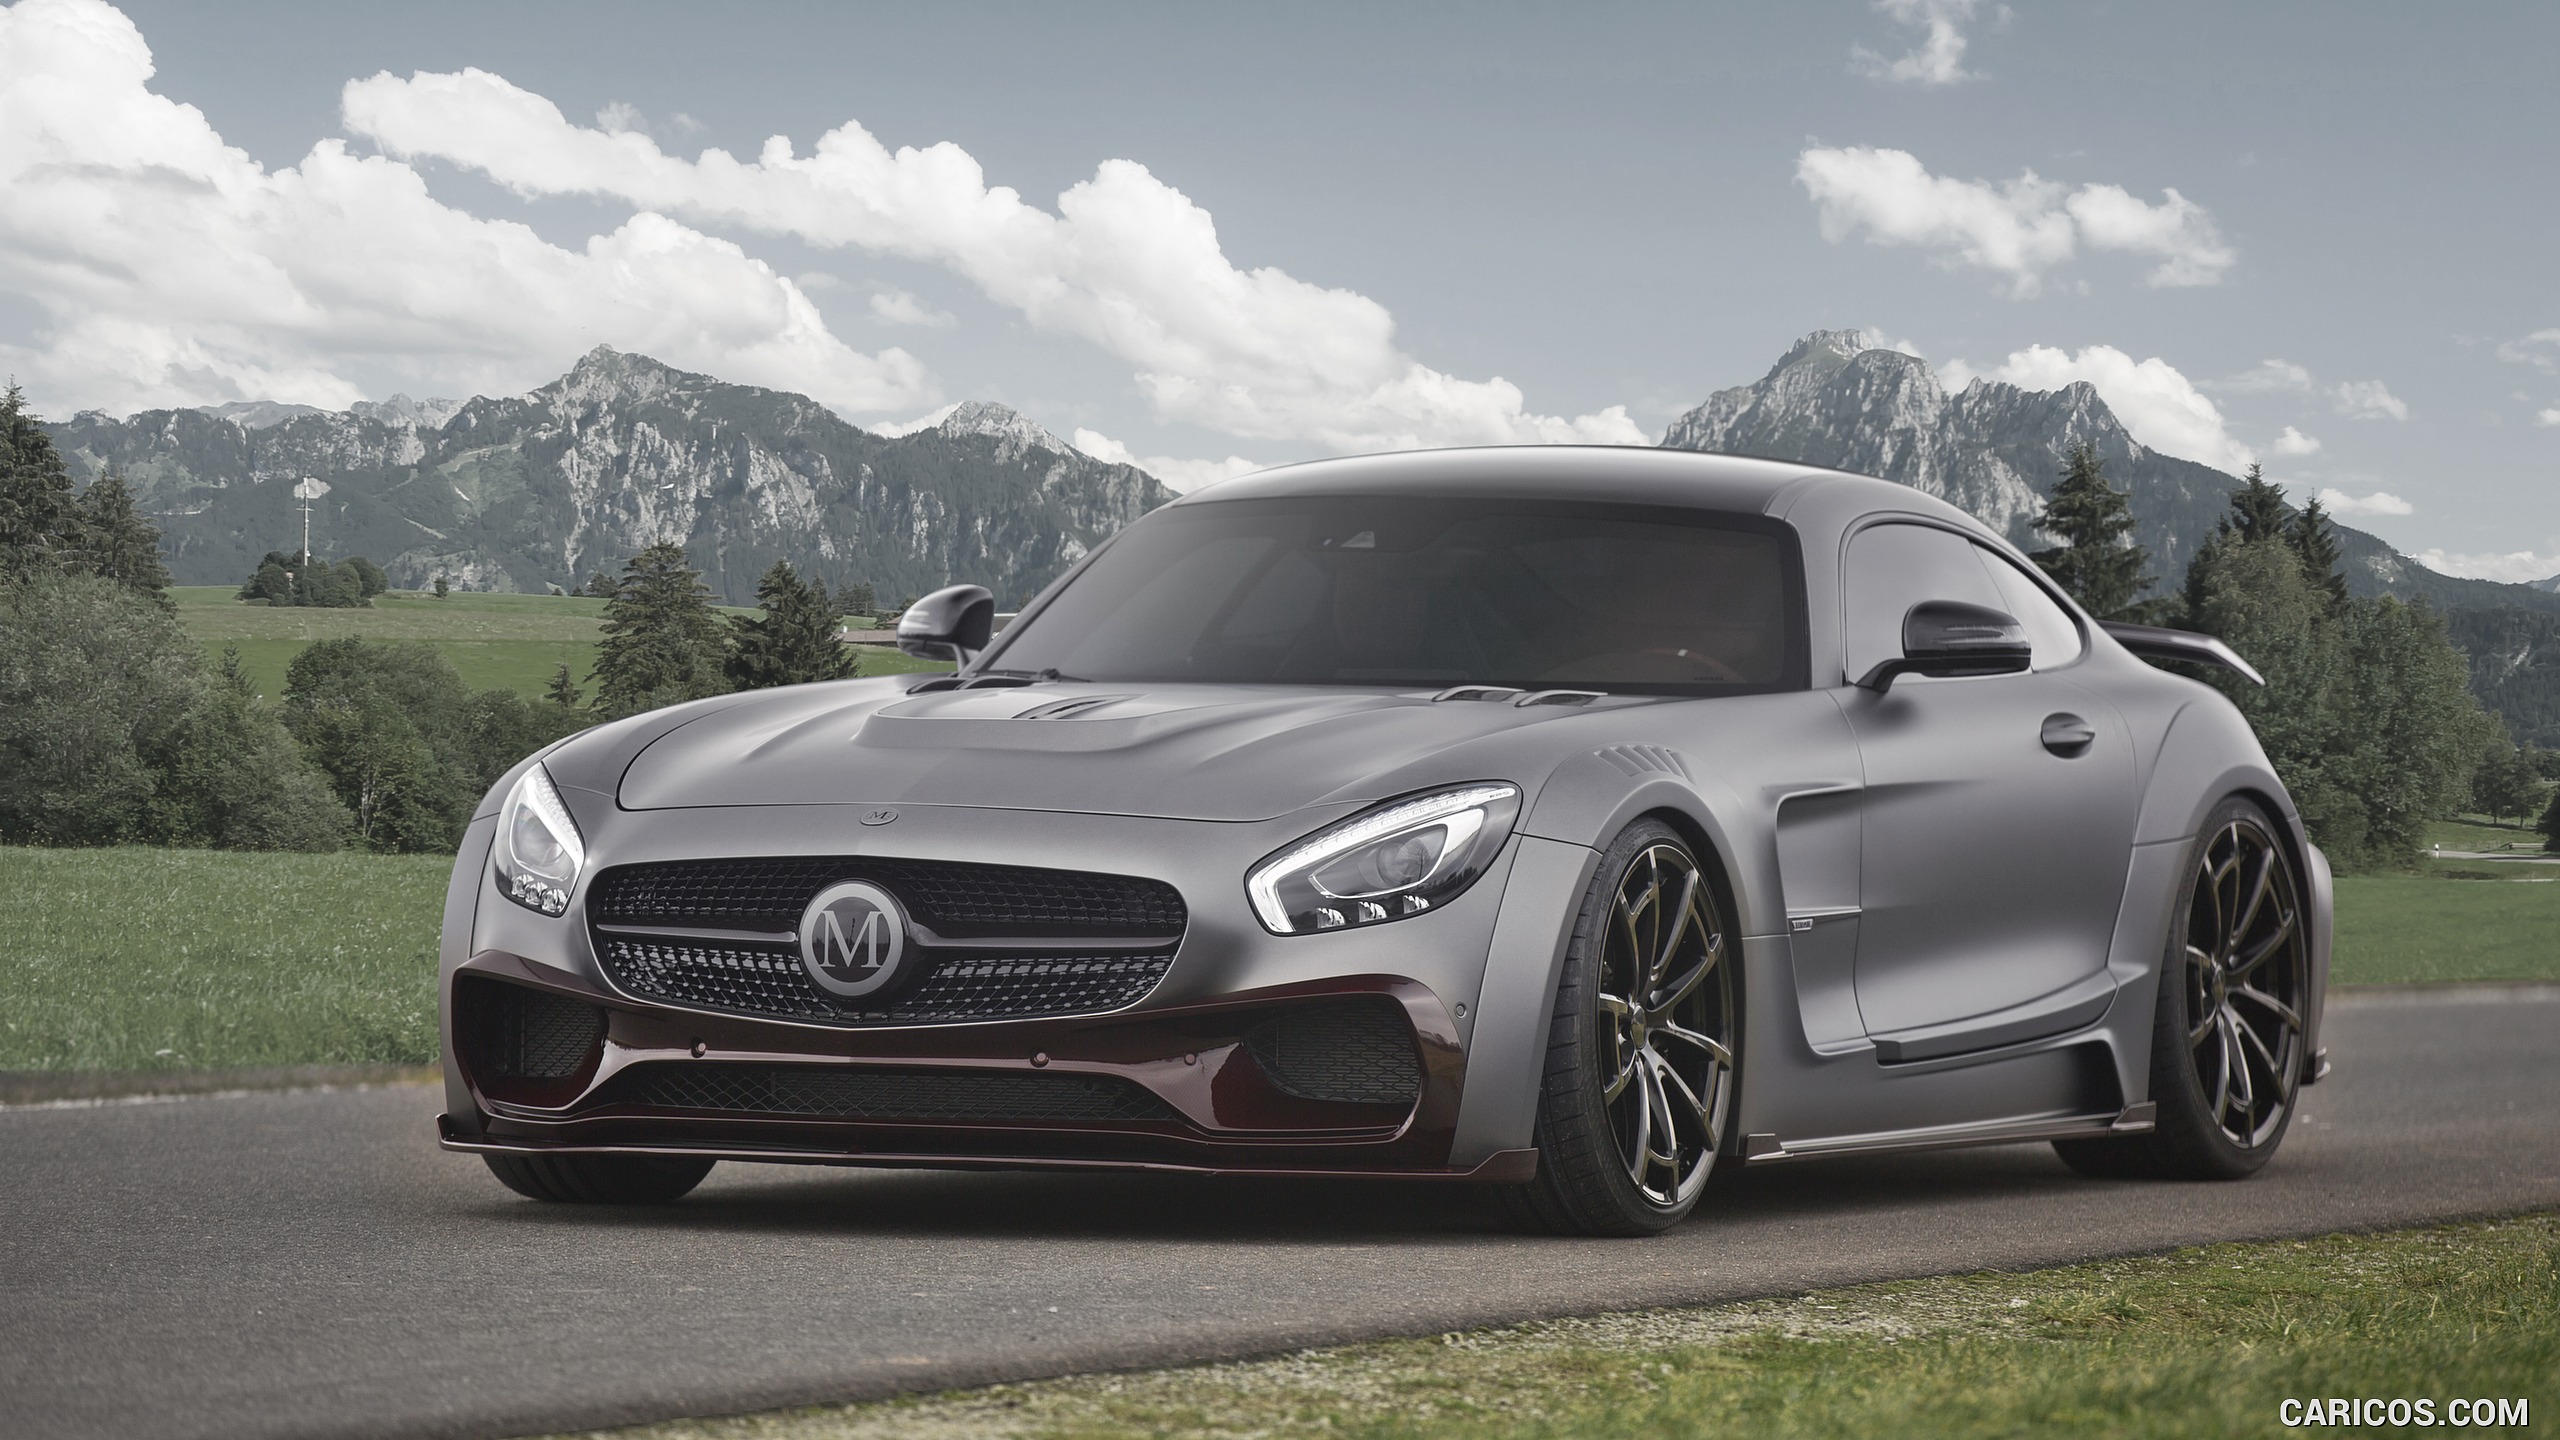 2016 MANSORY Mercedes-AMG GT S - Front, #1 of 10